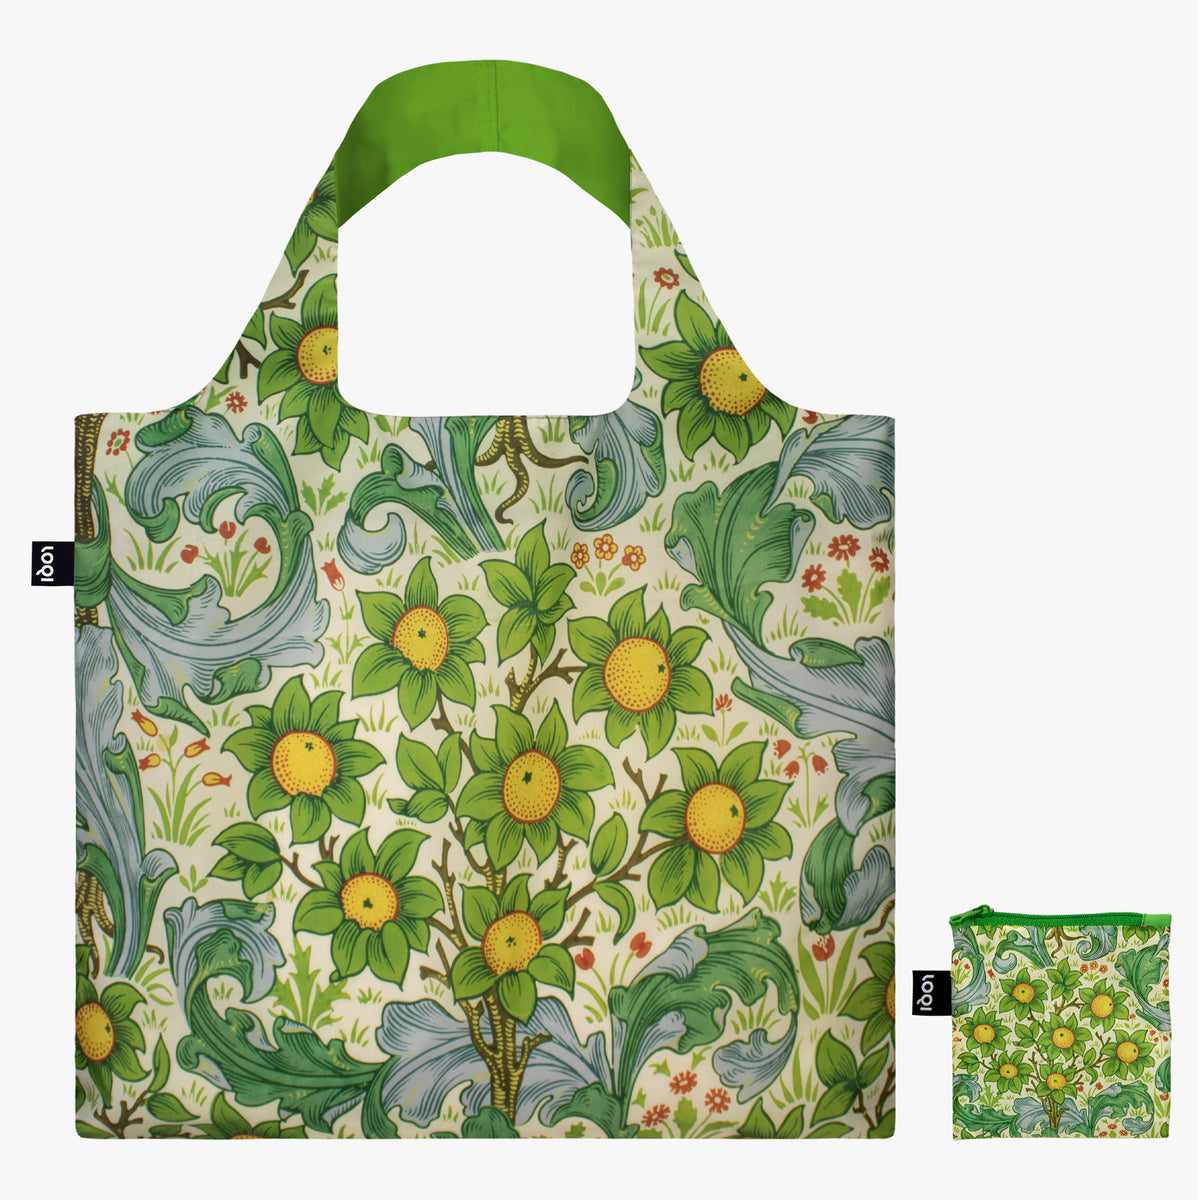 Orchard, Dearle, Recycled Bag